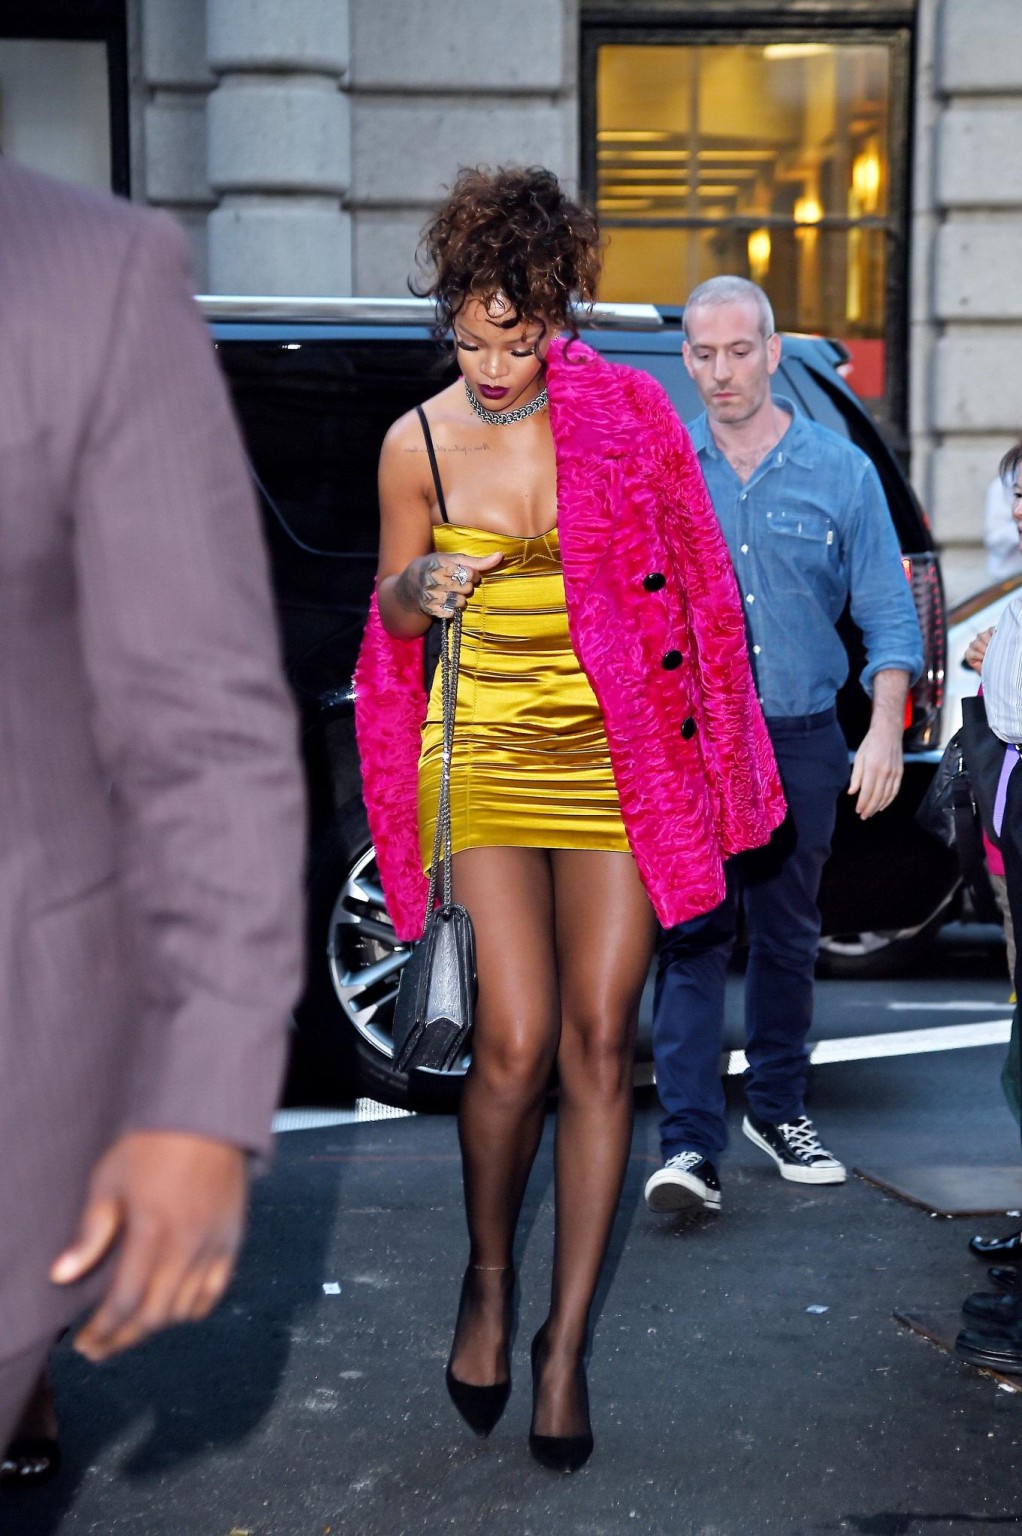 Rihanna shows cleavage and legs wearing a little yellow dress outside Nobu resta #75183279